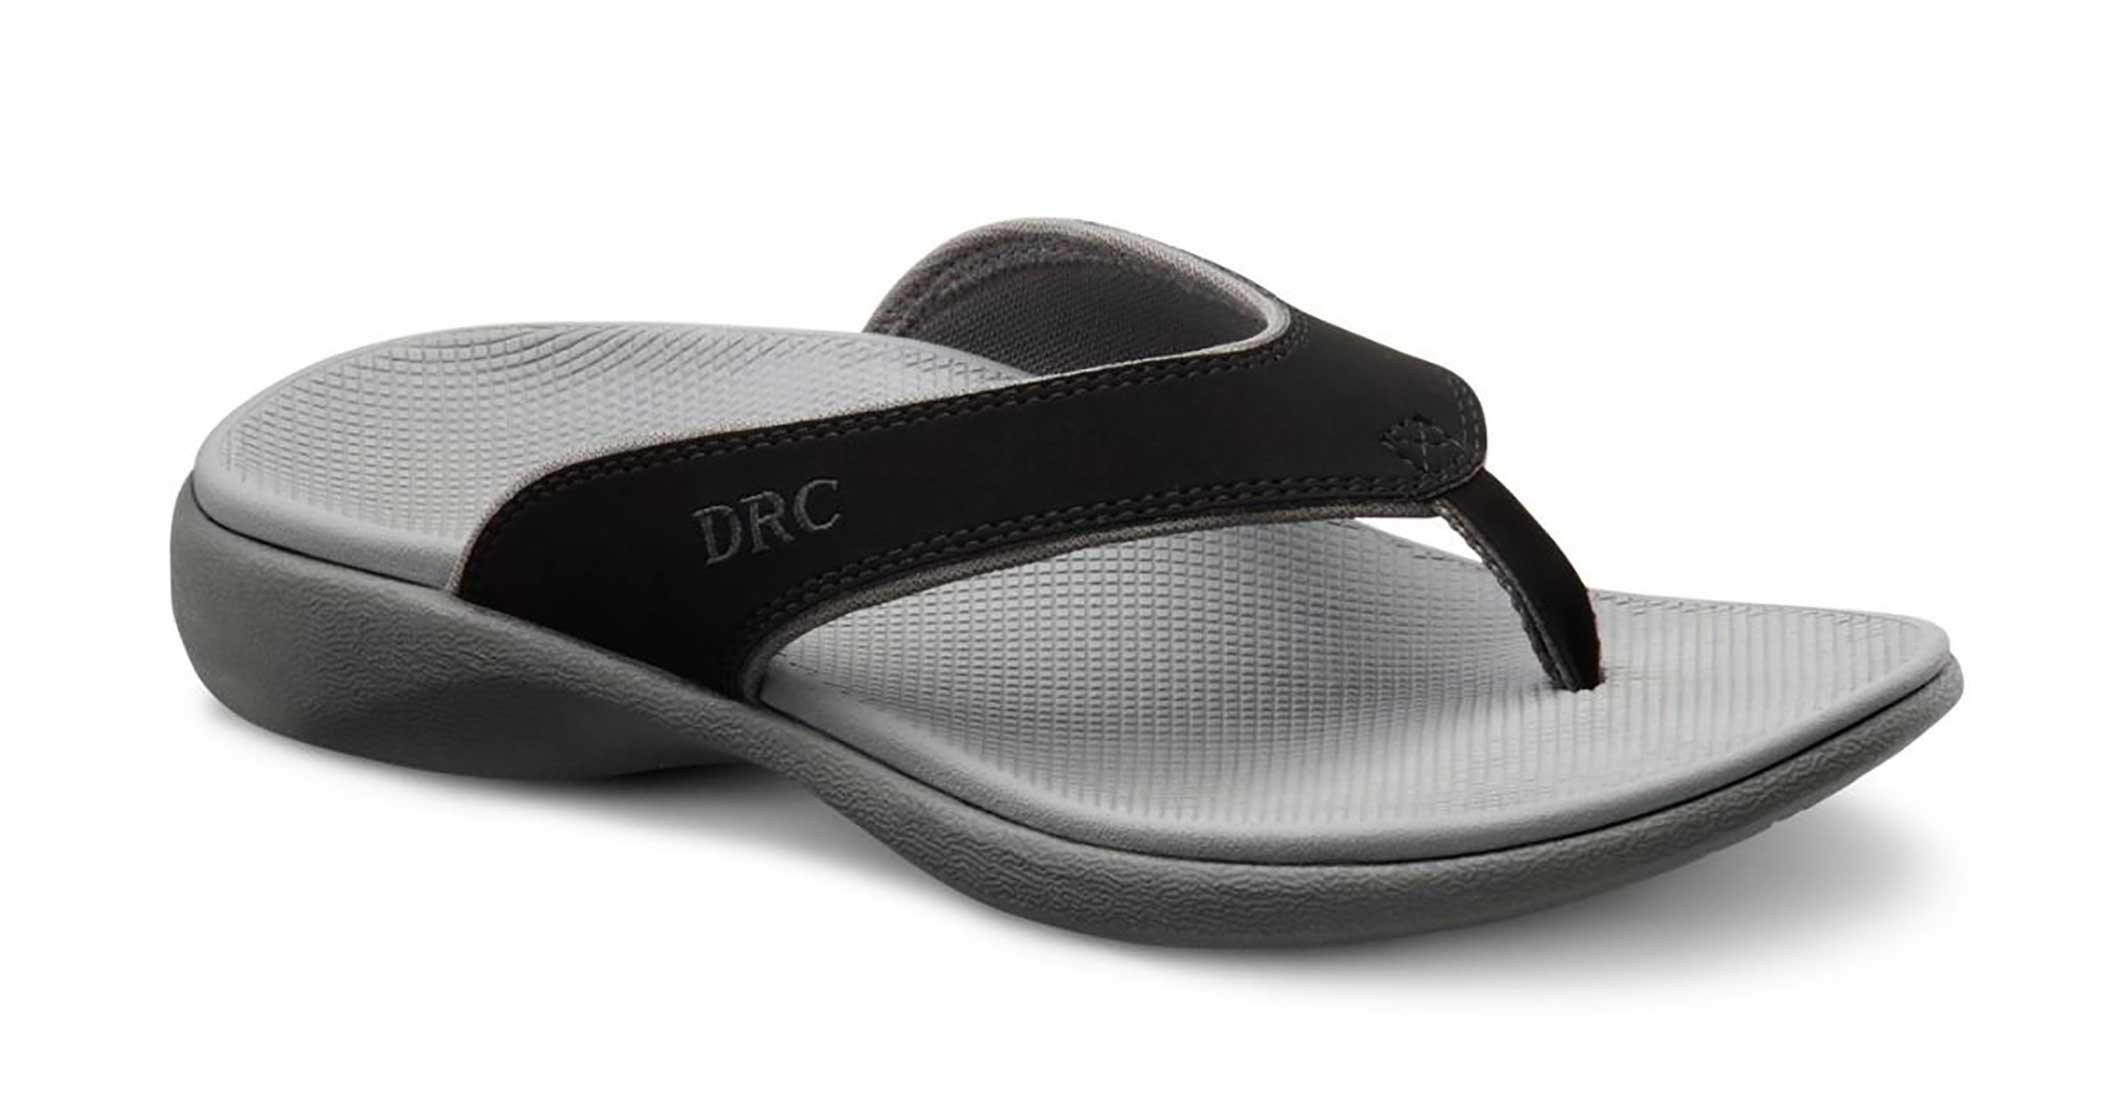 Dr Comfort Shoes Shannon - Women's Sandal - Open Comfort Collection With Removable Footbeds For Orthotics - Medium - Extra Wide